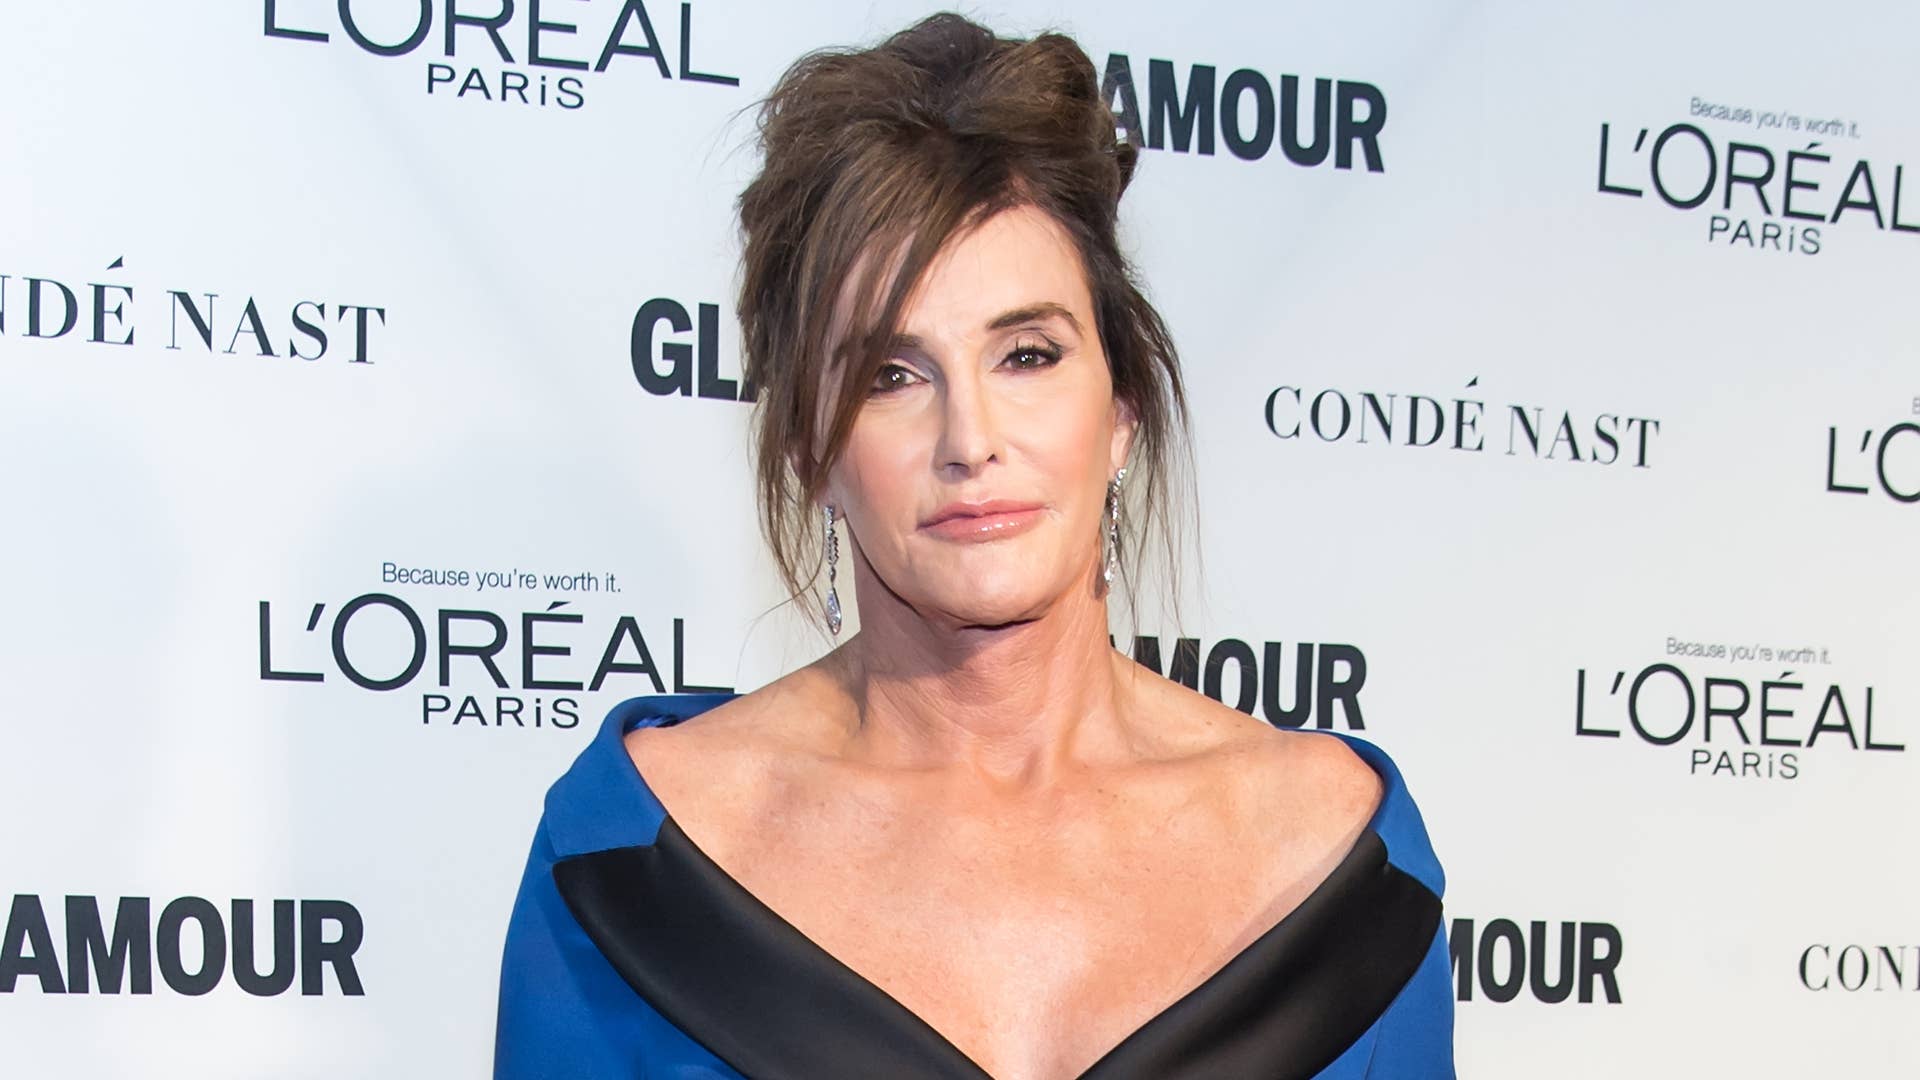 Caitlyn Jenner photographed on red carpet.